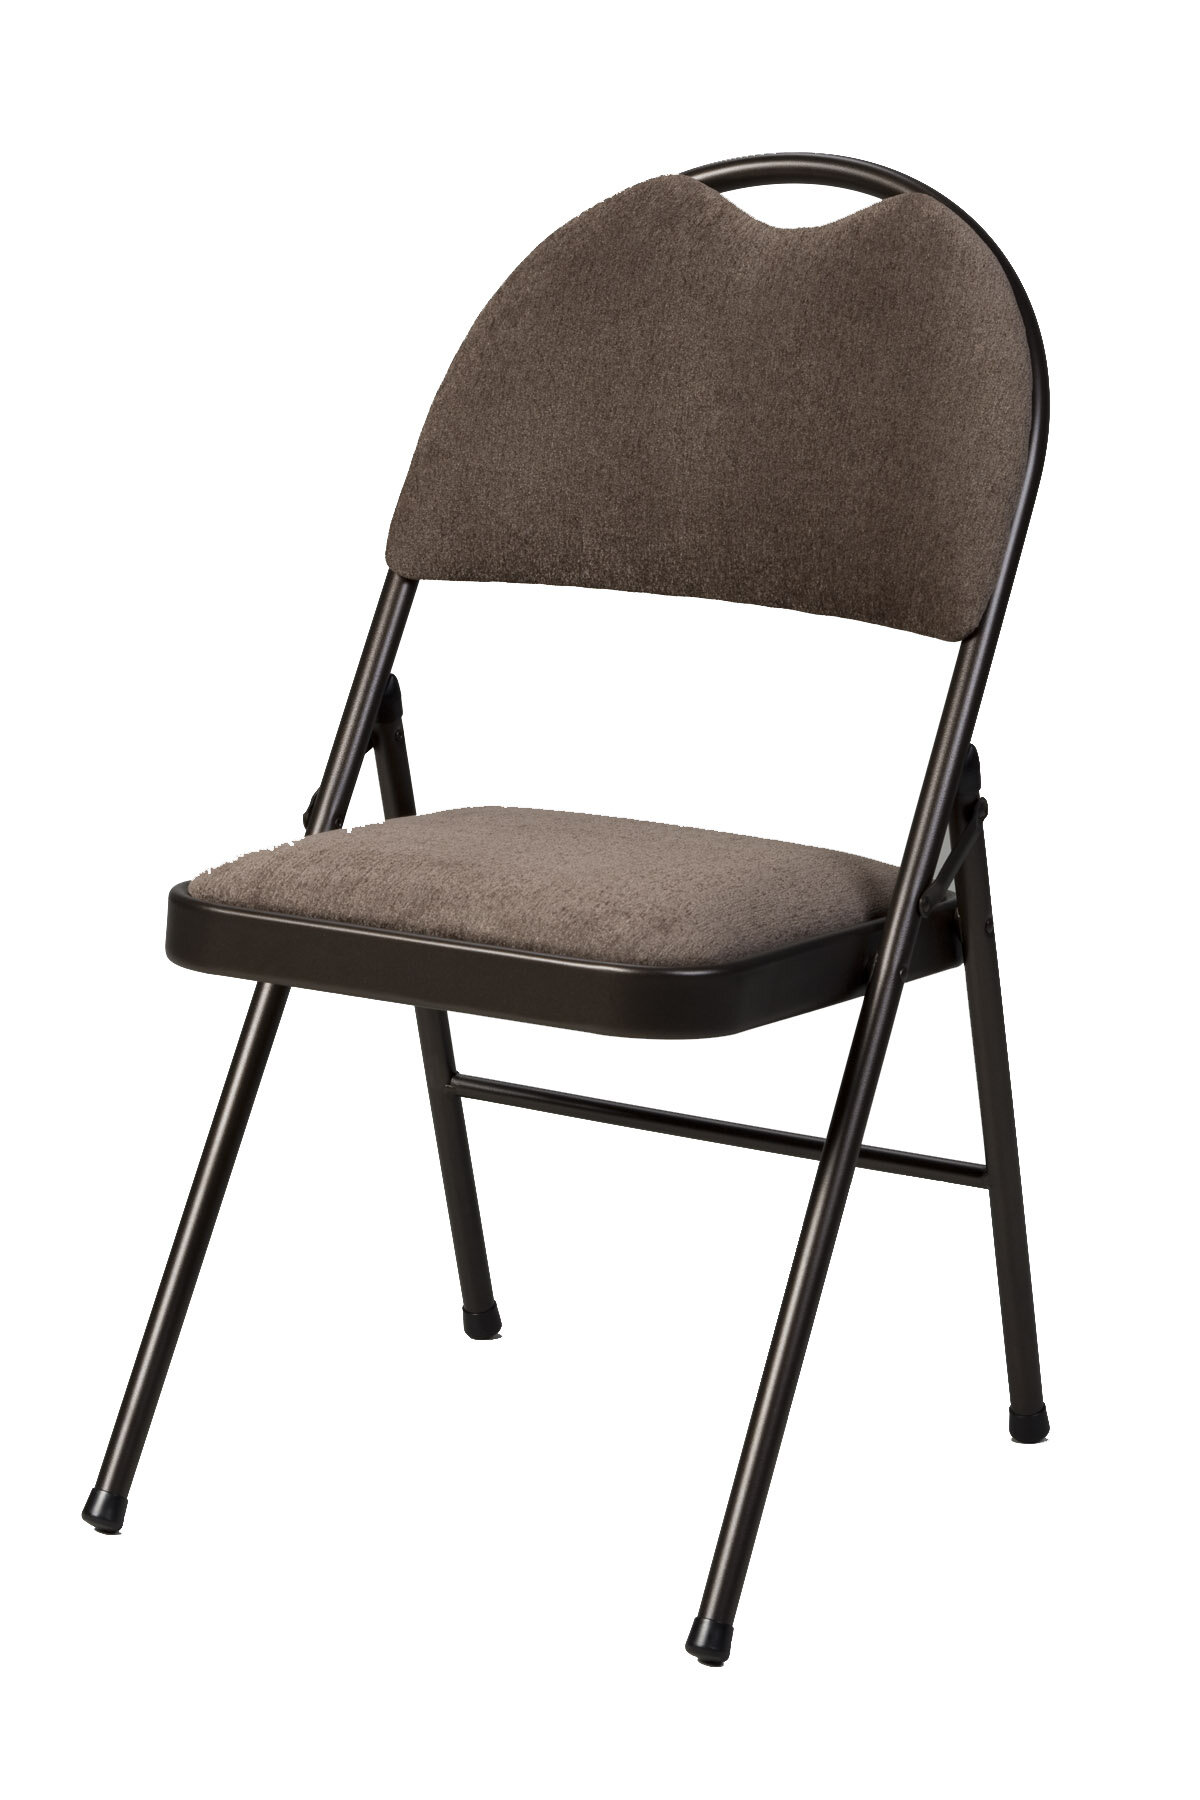 Double Fabric Padded Folding Chair 